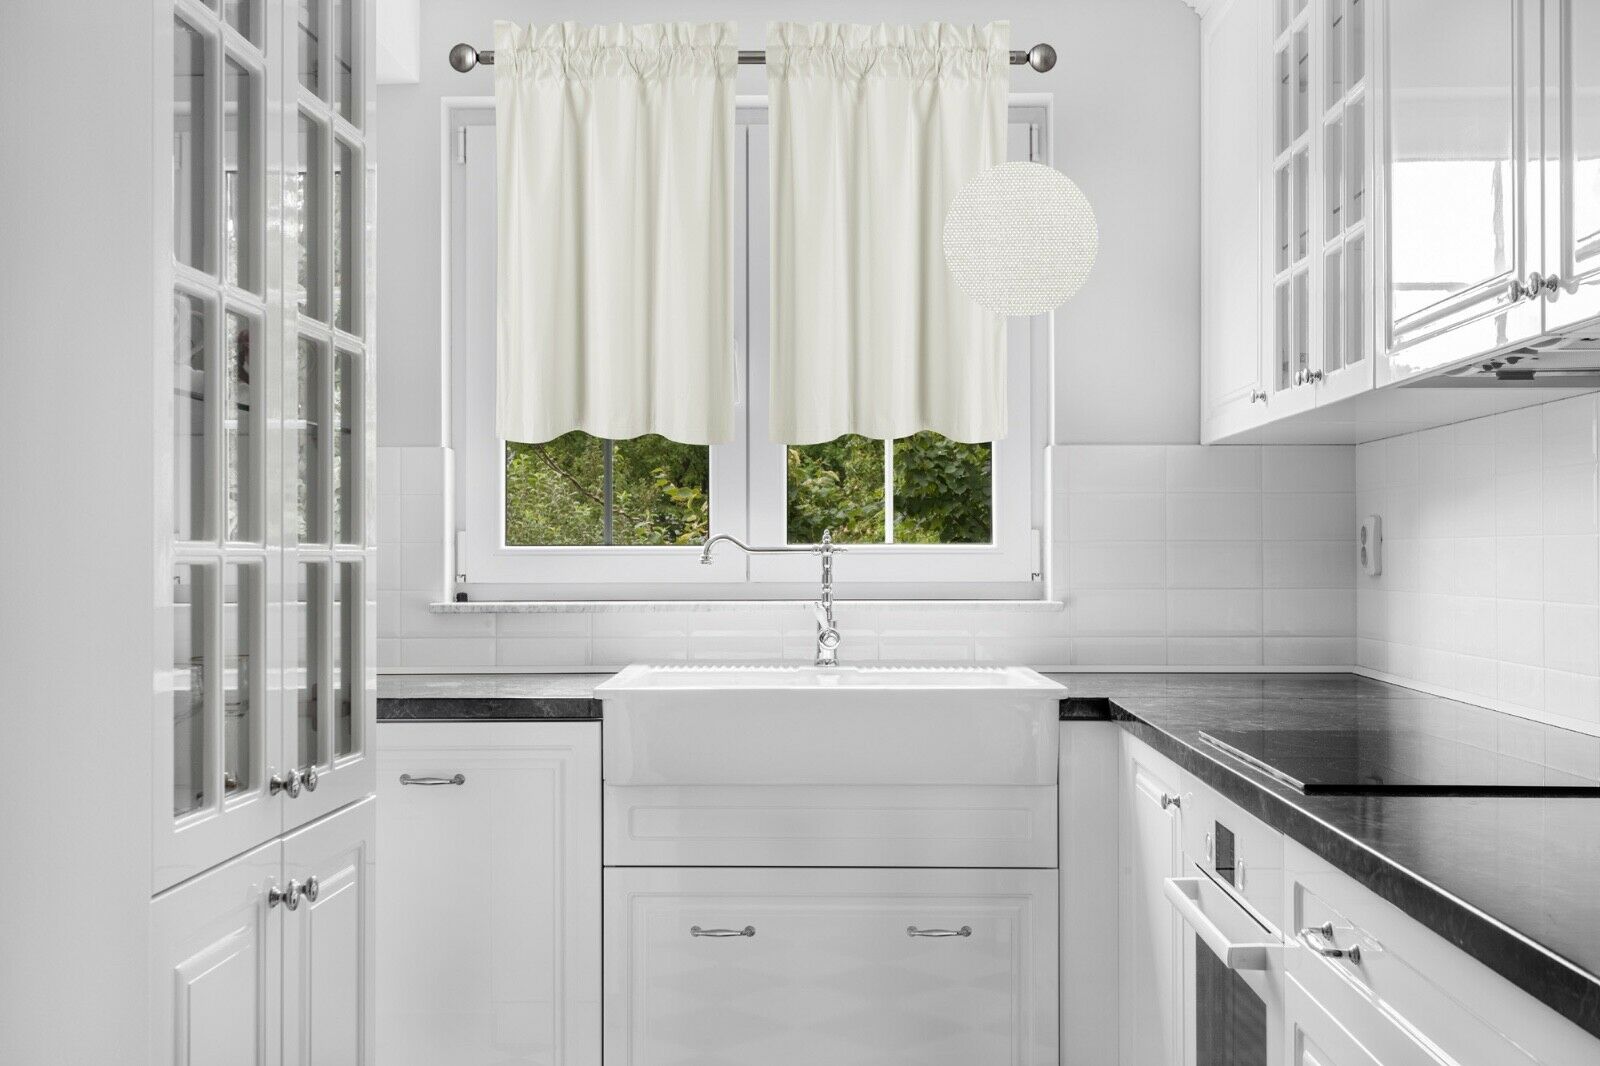 2 PIECES R16 IVORY WHITE OFF SOLID COLOR TIER PANELS ROD POCKET WINDOW CURTAIN KITCHEN RESTAURANT BATHROOM NURSERY VALANCE LIGHT FILTERING BLACKOUT SIZE 30" WIDE X 24" LENGTH EACH TIER - image 1 of 1